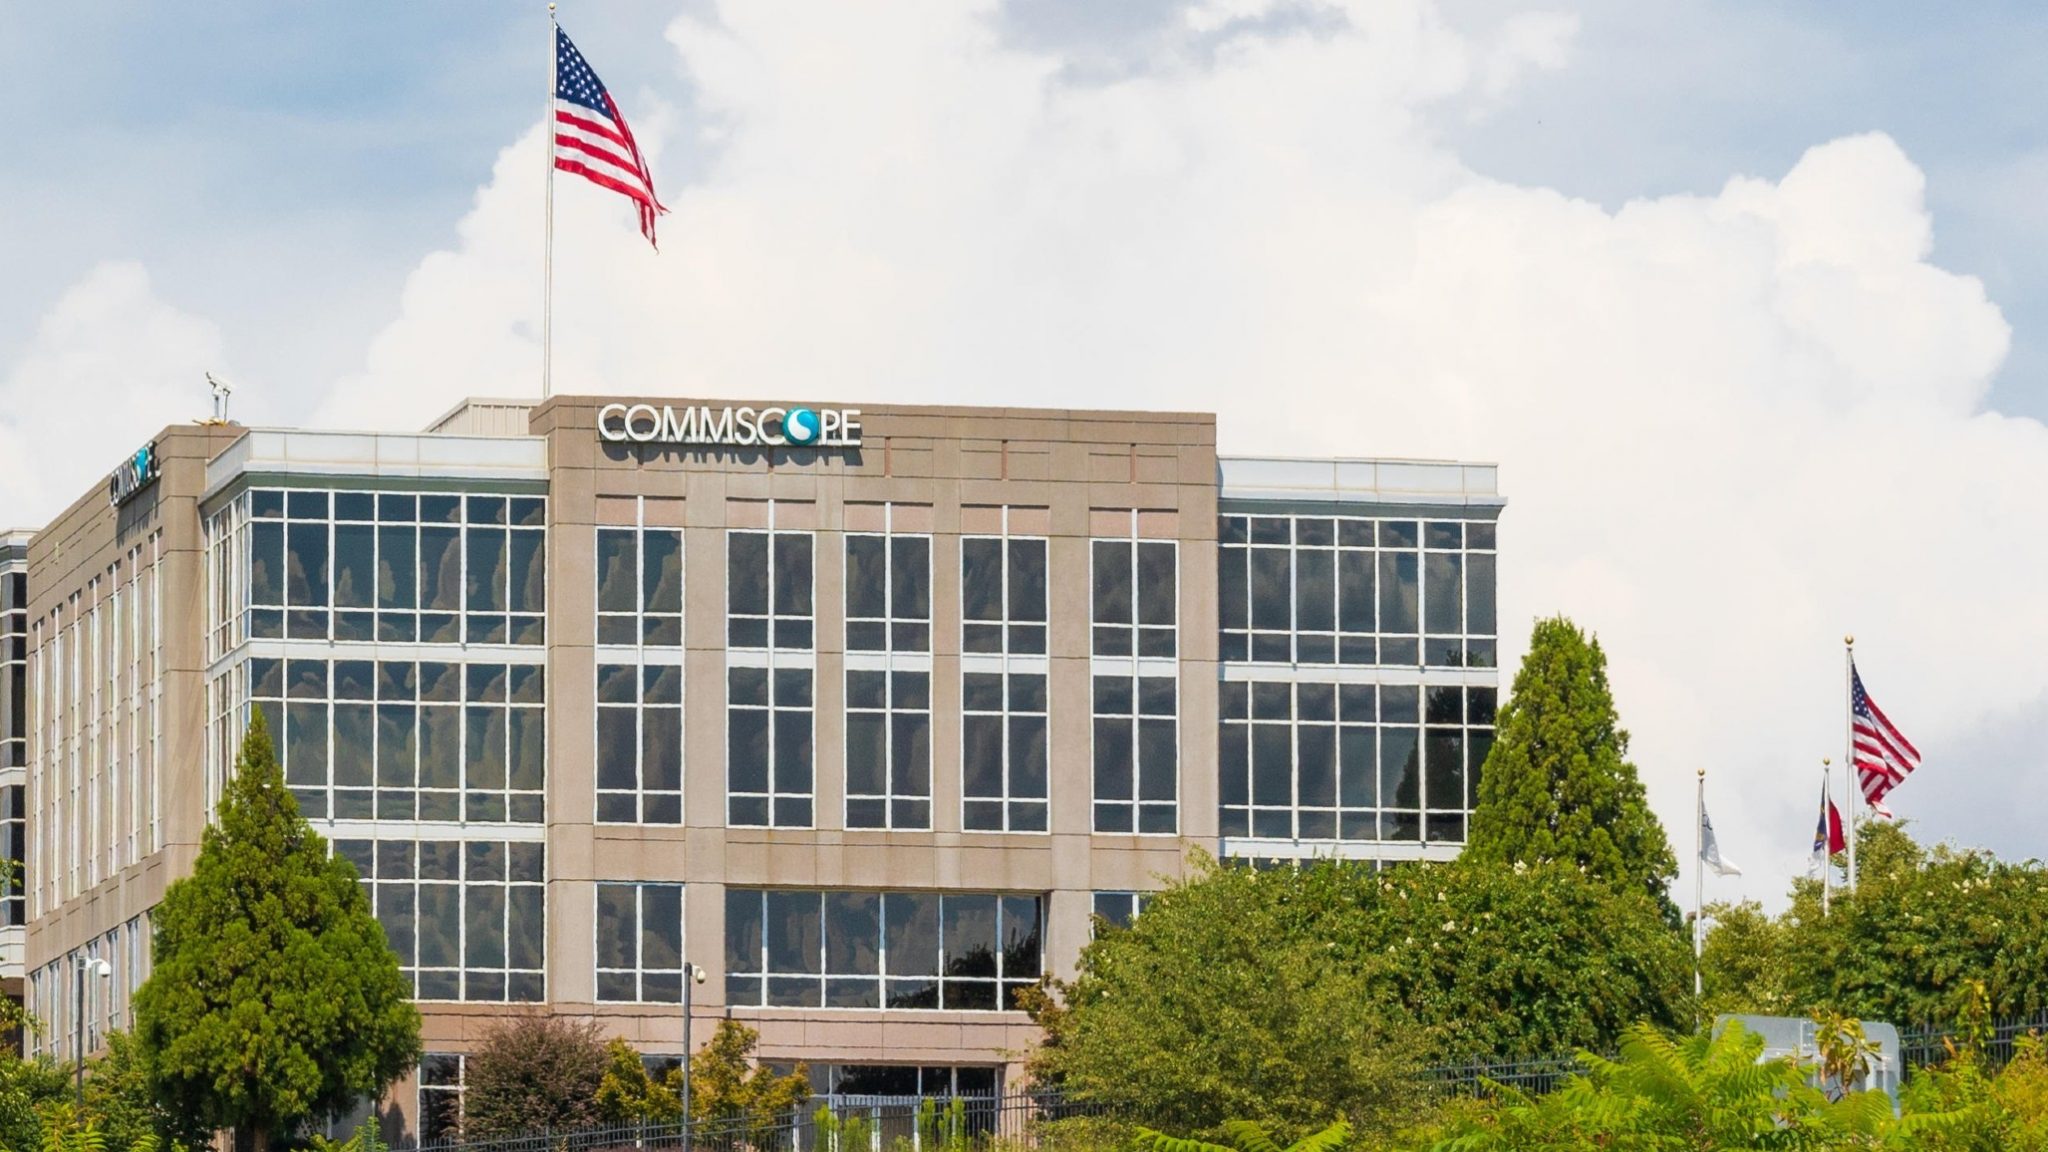 CommScope downgraded for heavy debt load, ongoing supply-chain concerns -  Urgent Comms